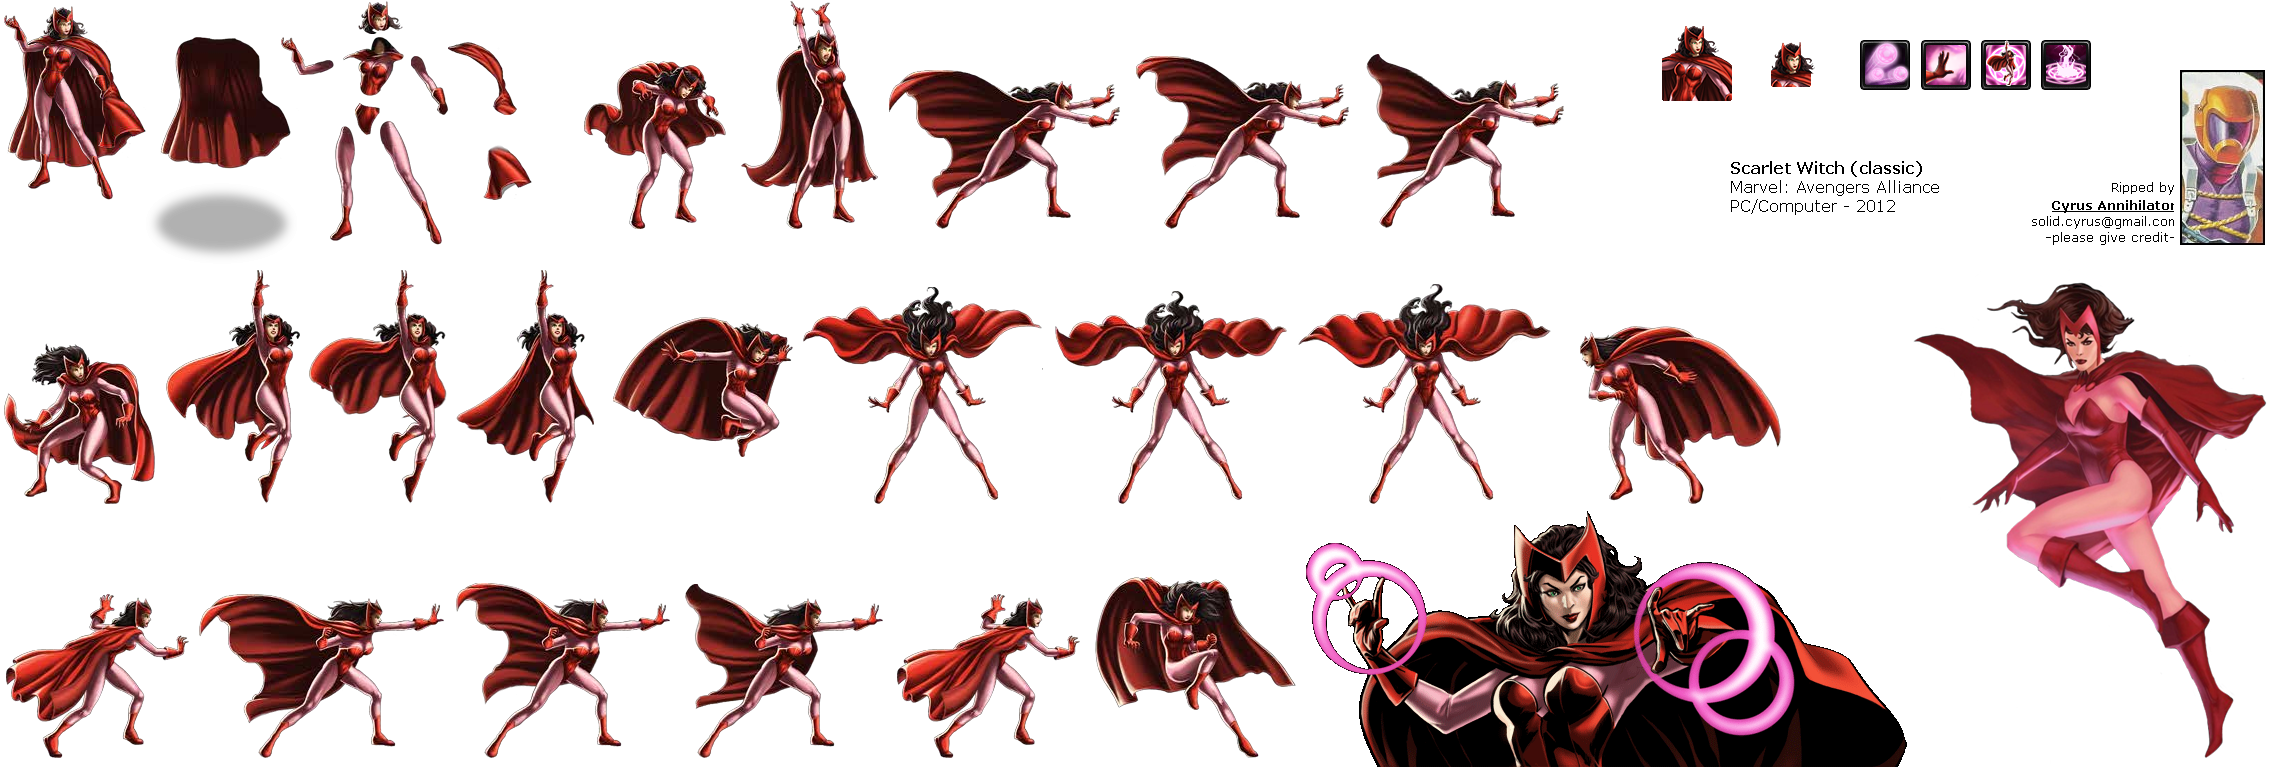 Marvel: Avengers Alliance - Scarlet Witch (Classic)